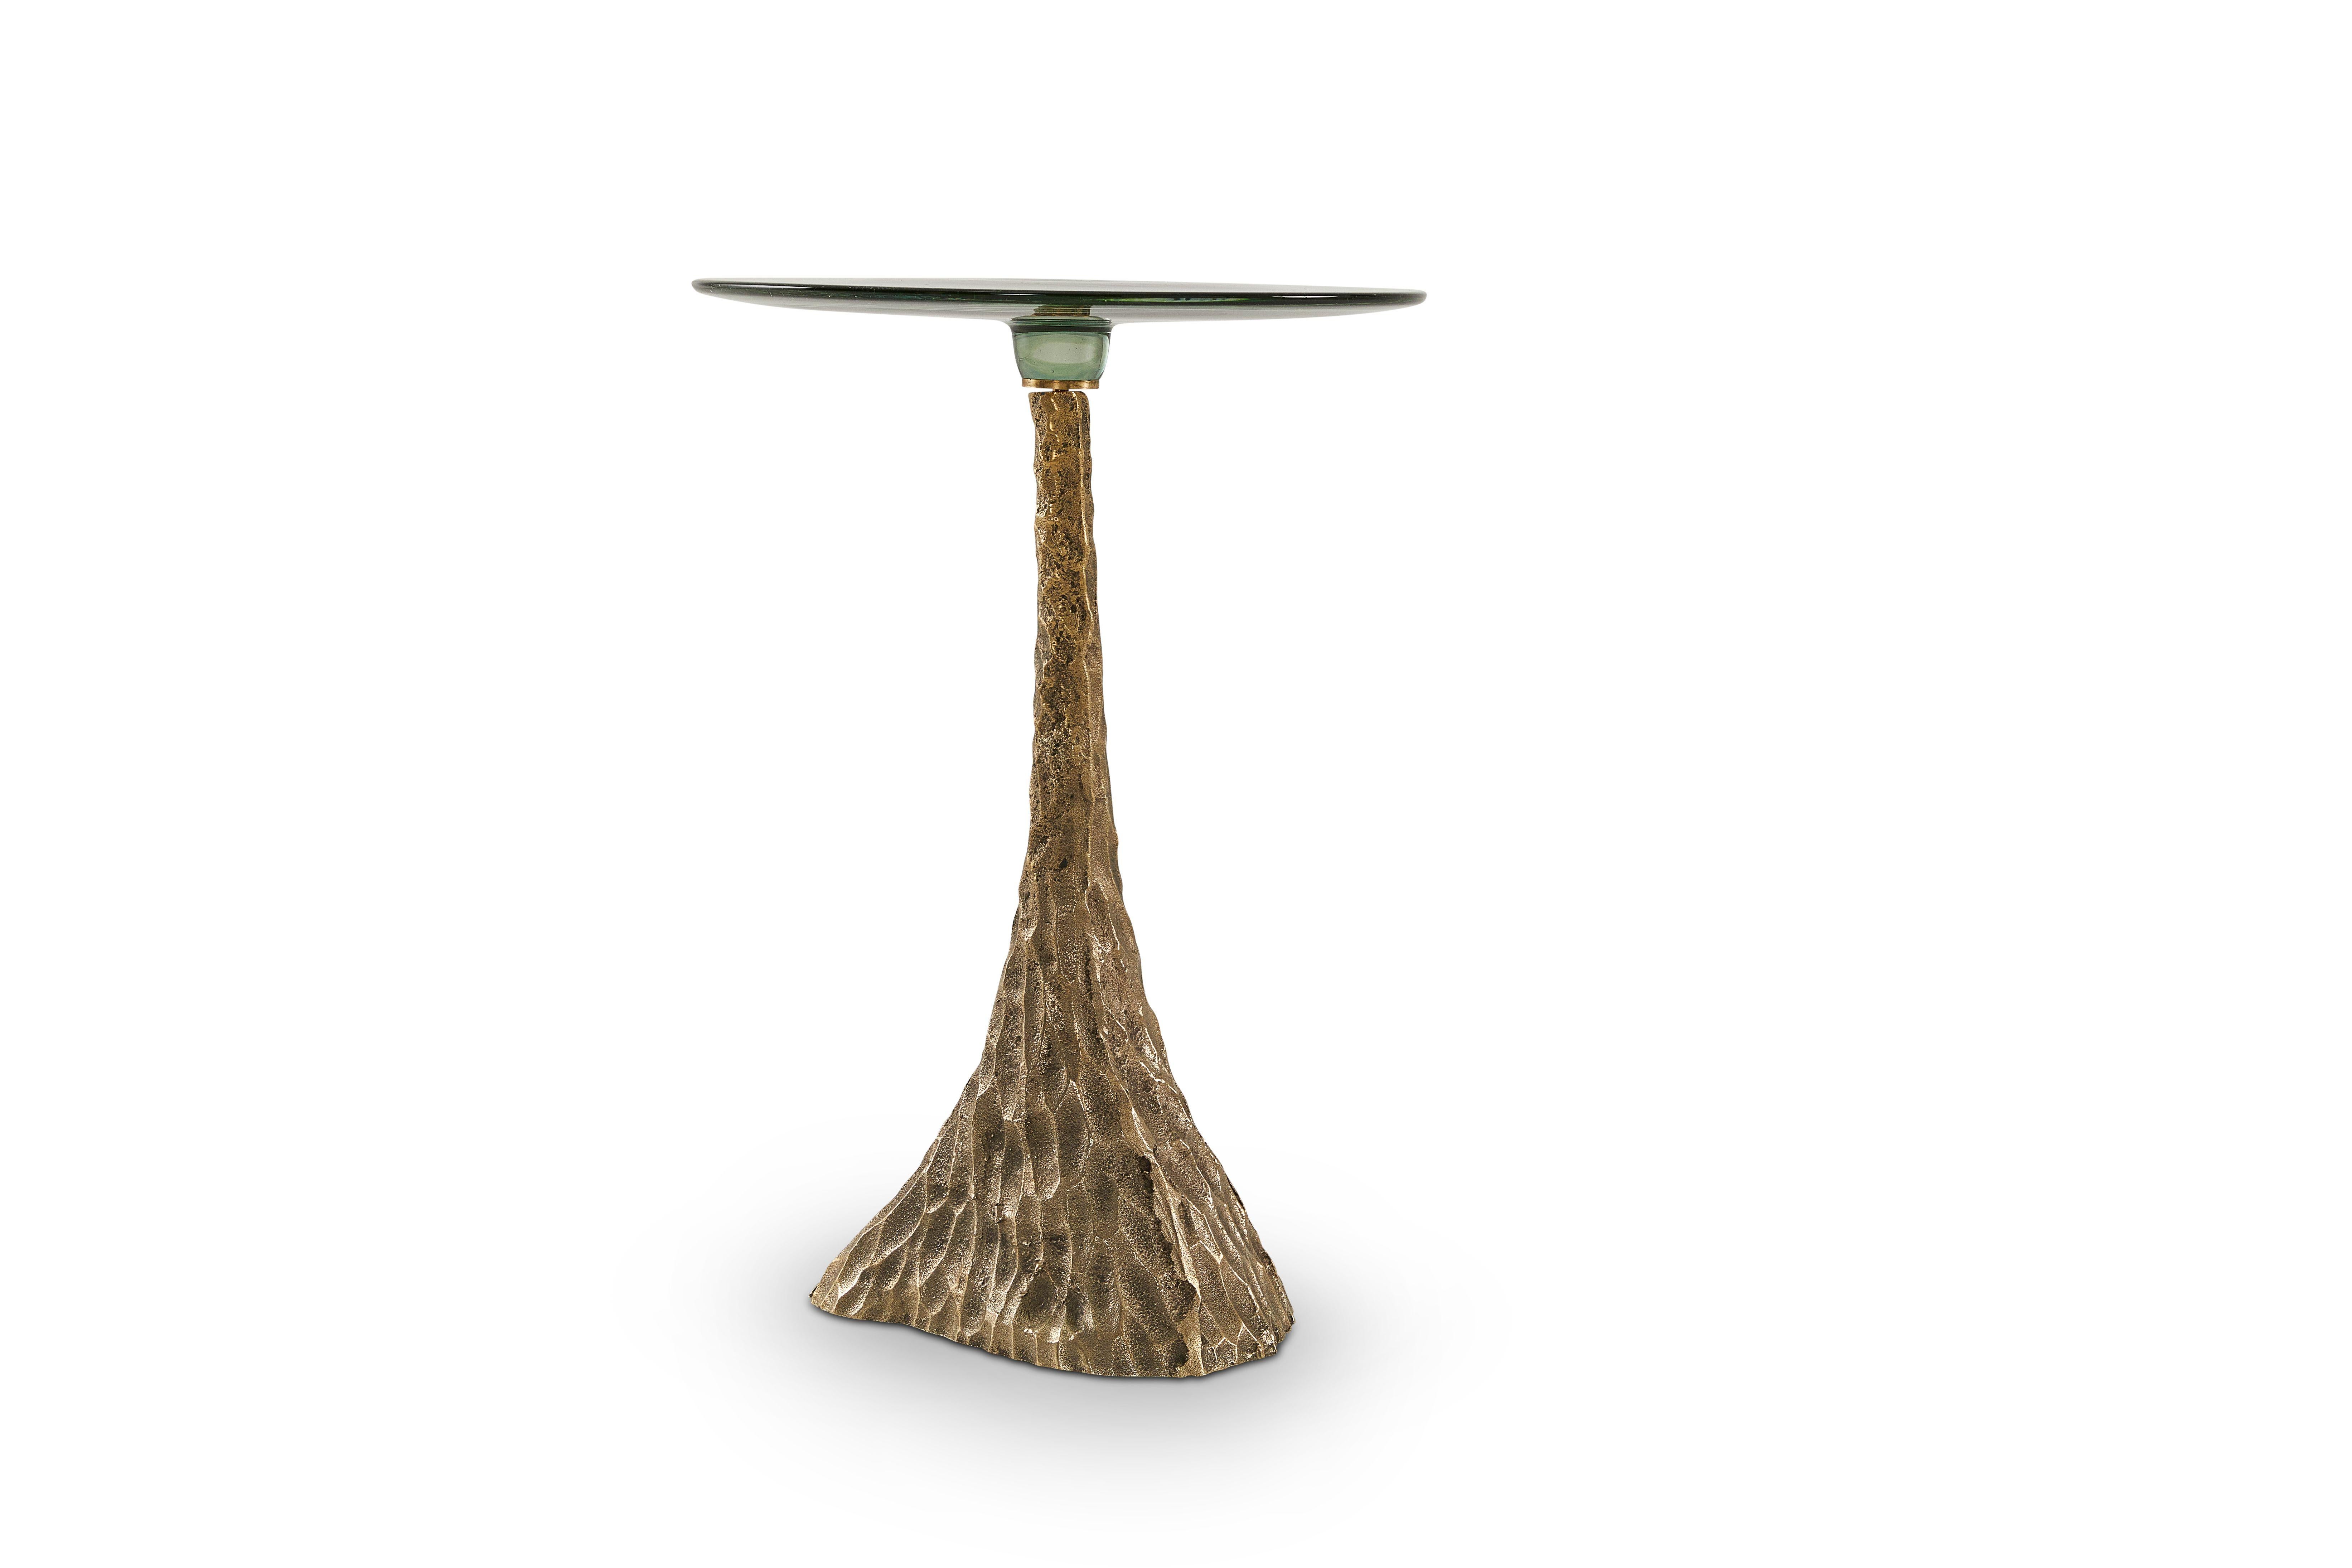 Trumpet large side table by Egg Designs.
Dimensions: 38 L X 38 D X H 54 cm 
Materials: solid cast brass, hand blown glass.

Founded by South Africans and life partners, Greg and Roche Dry - Egg is a unique perspective in contemporary furniture